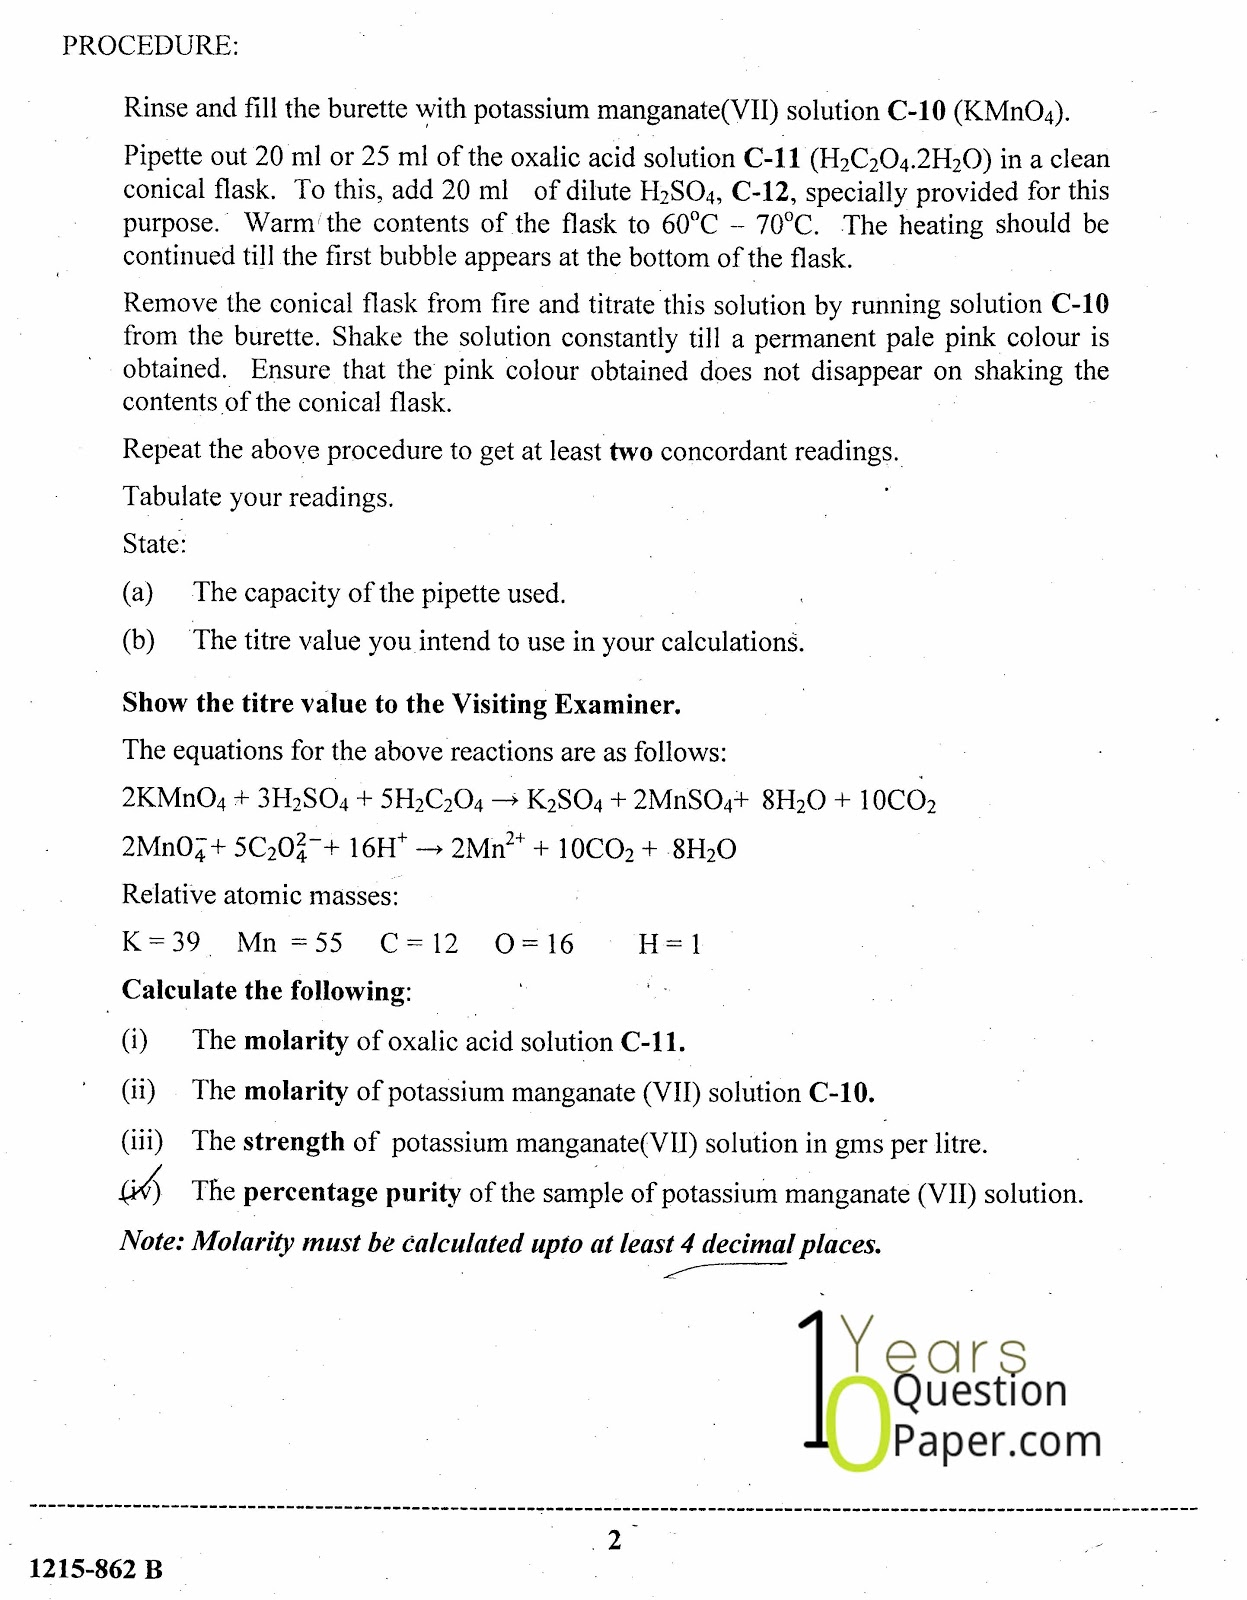 Sample papers for class 12 physics 2014 with solutions